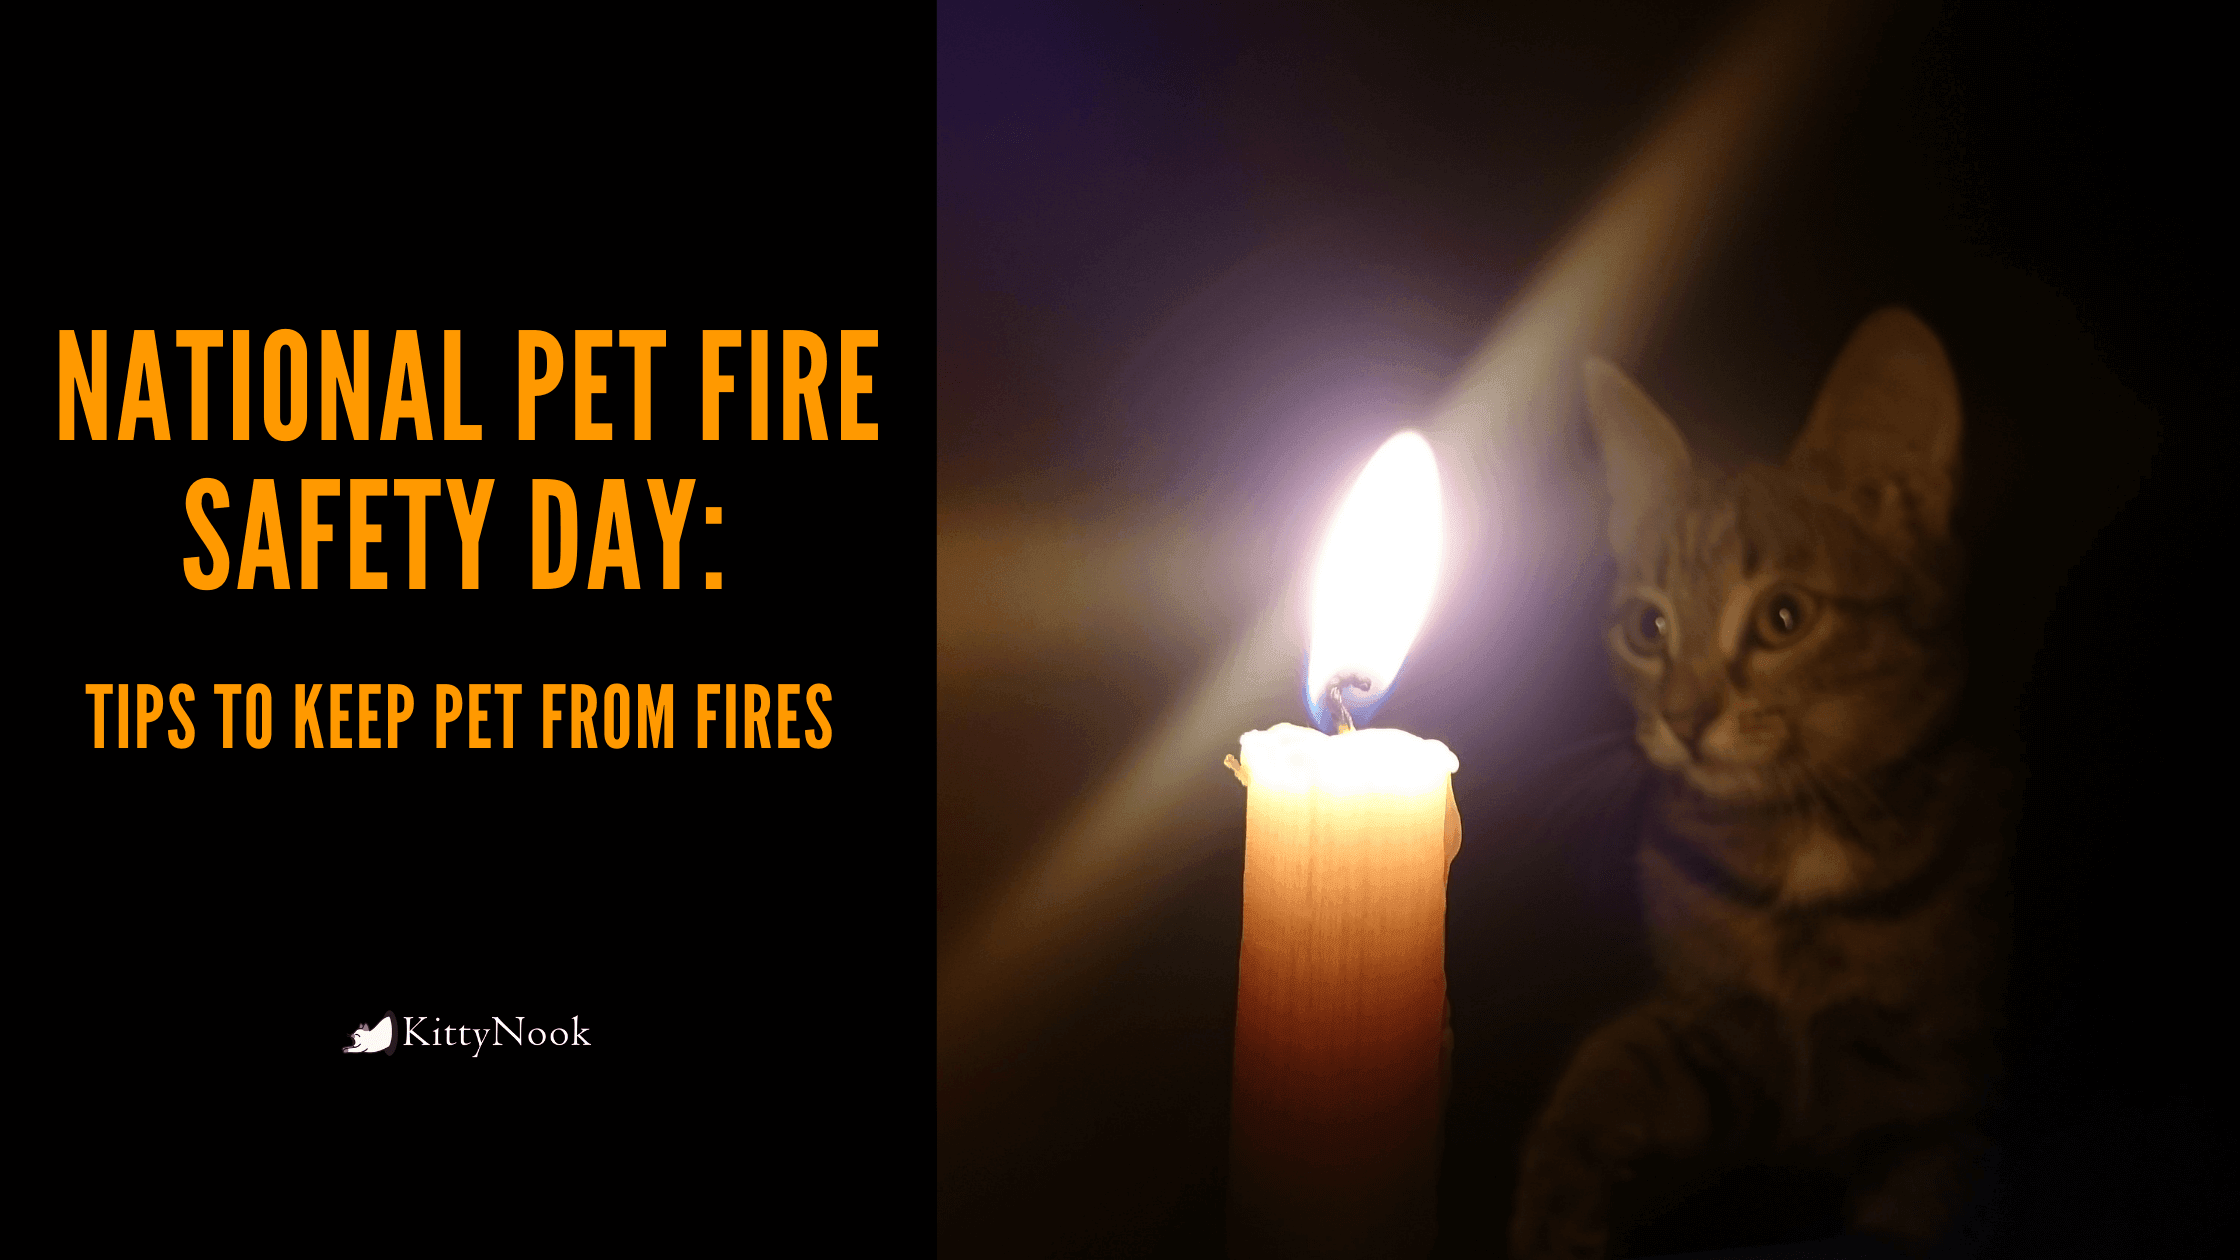 'National Pet Fire Safety Day' Tips to Keep Pet from Fires - KittyNook